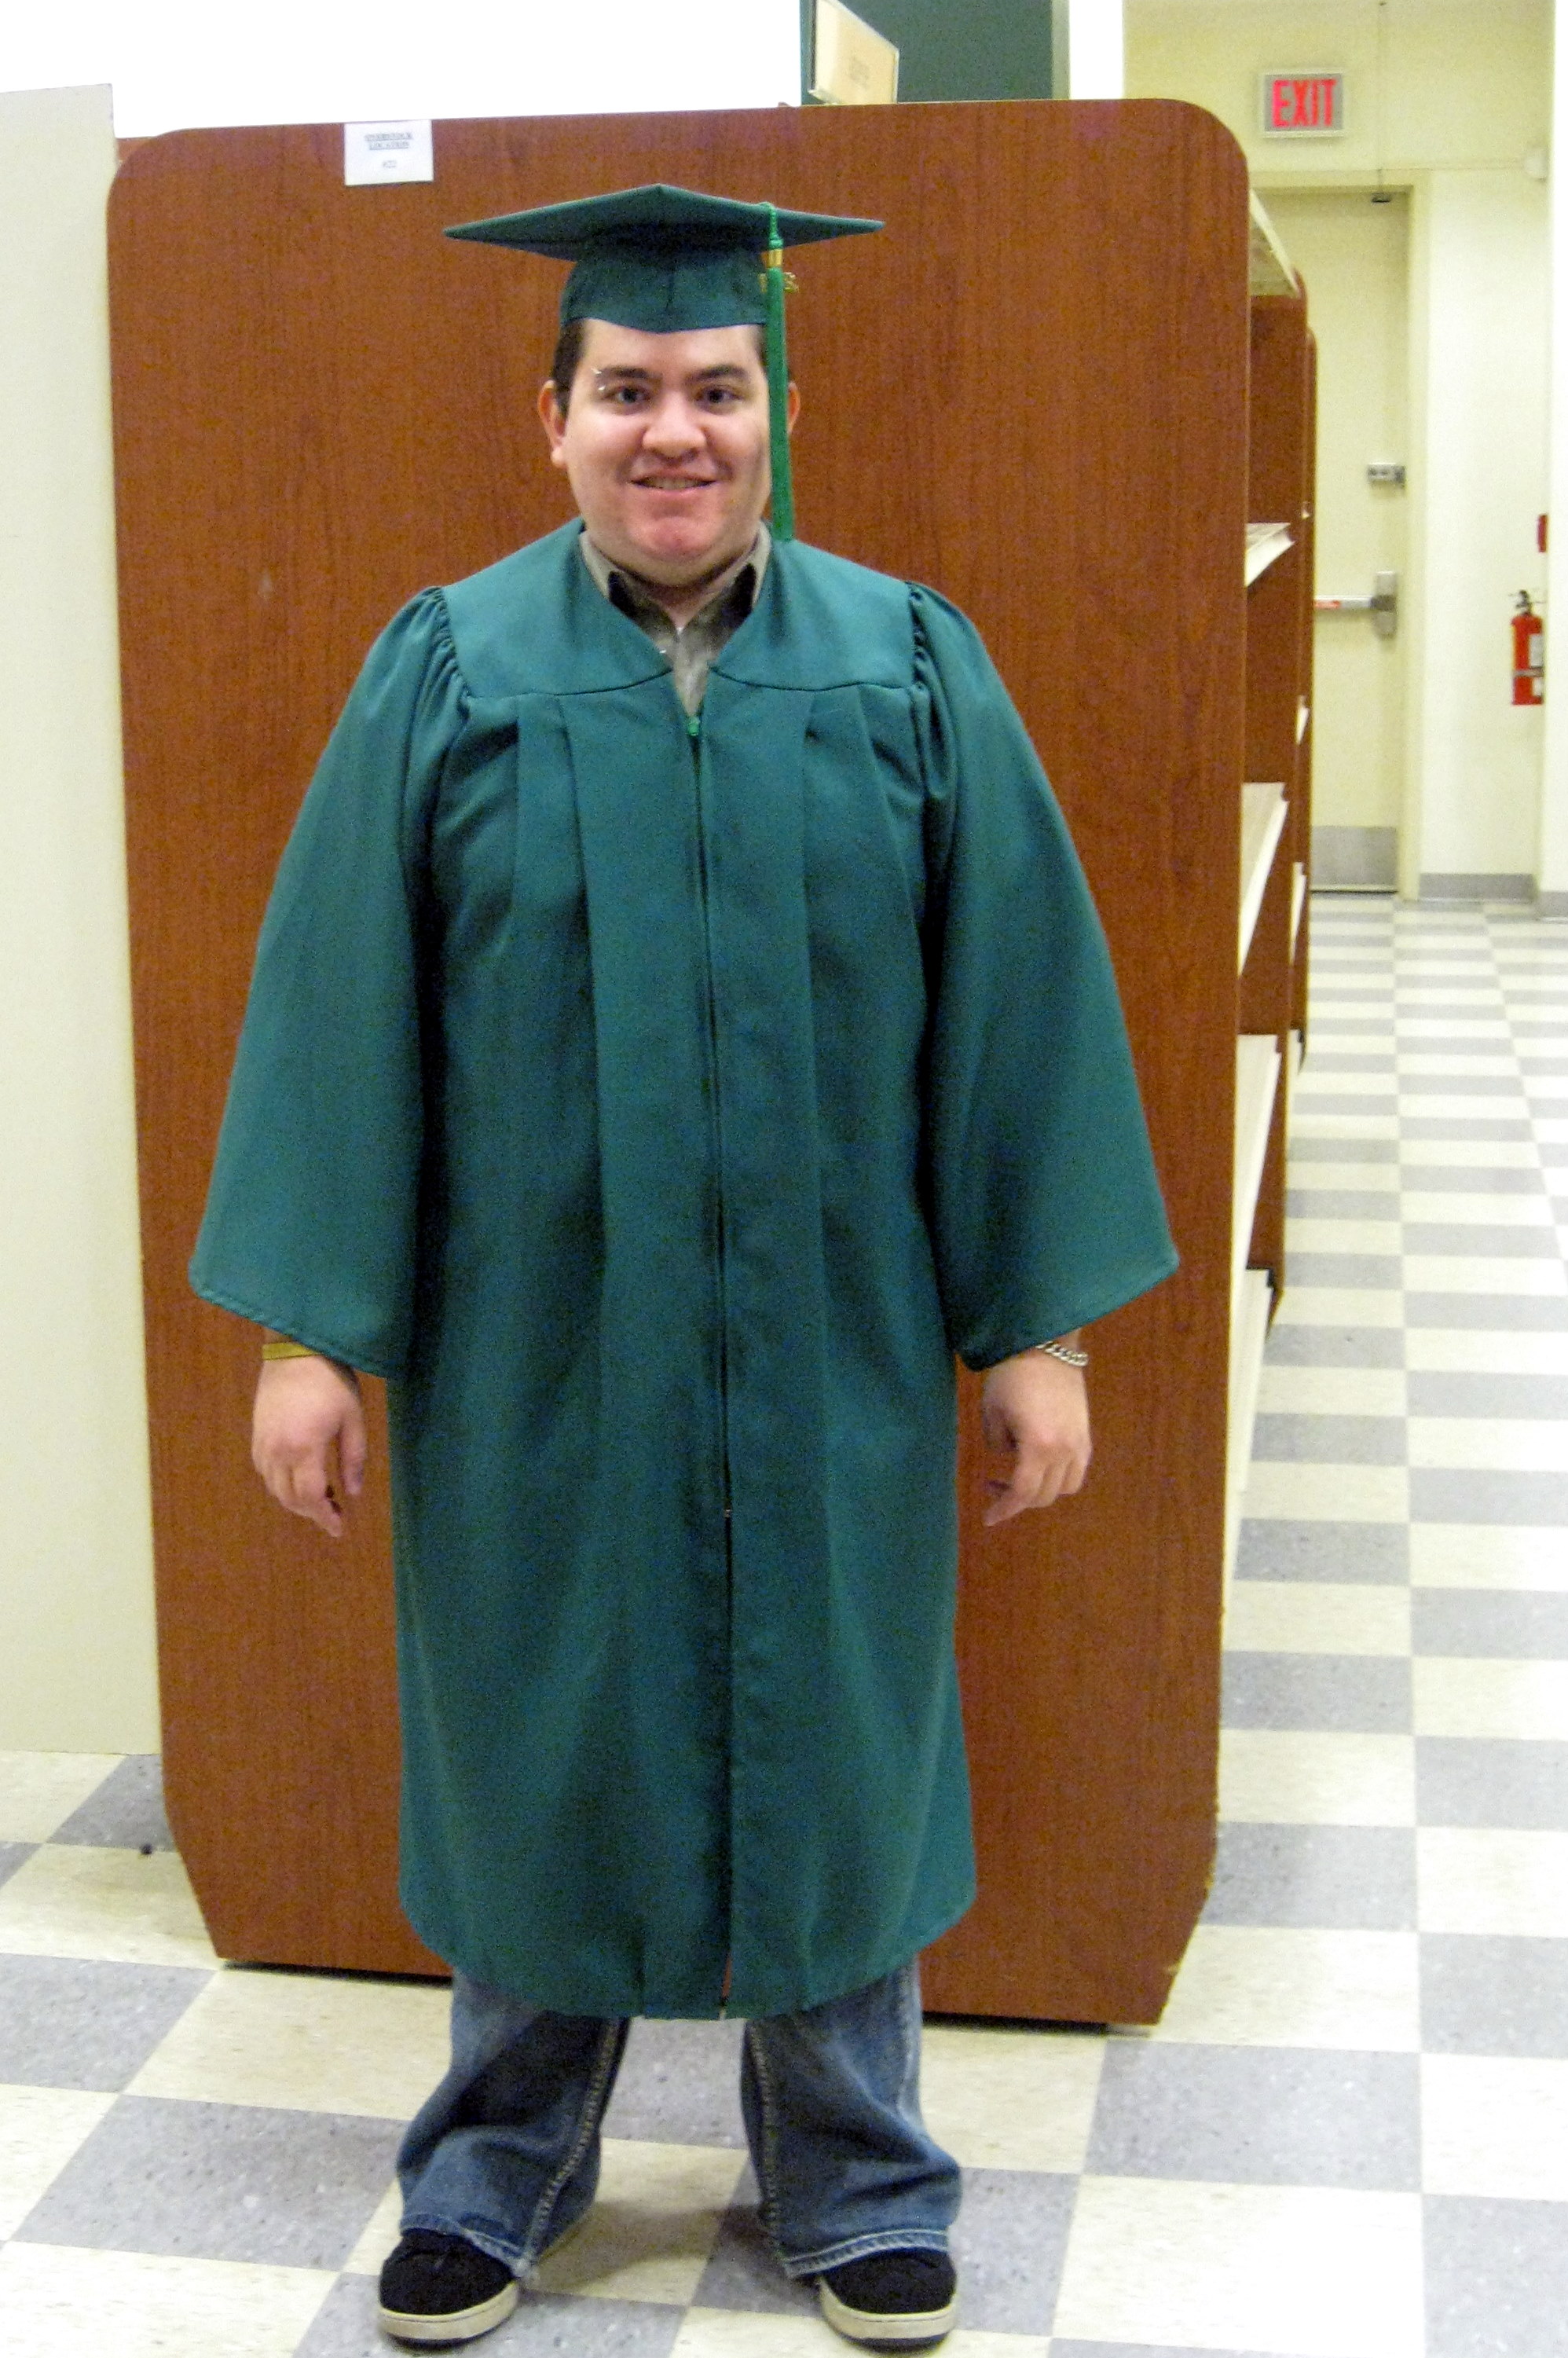 Green' graduation gowns to be used this year | Connect2Mason